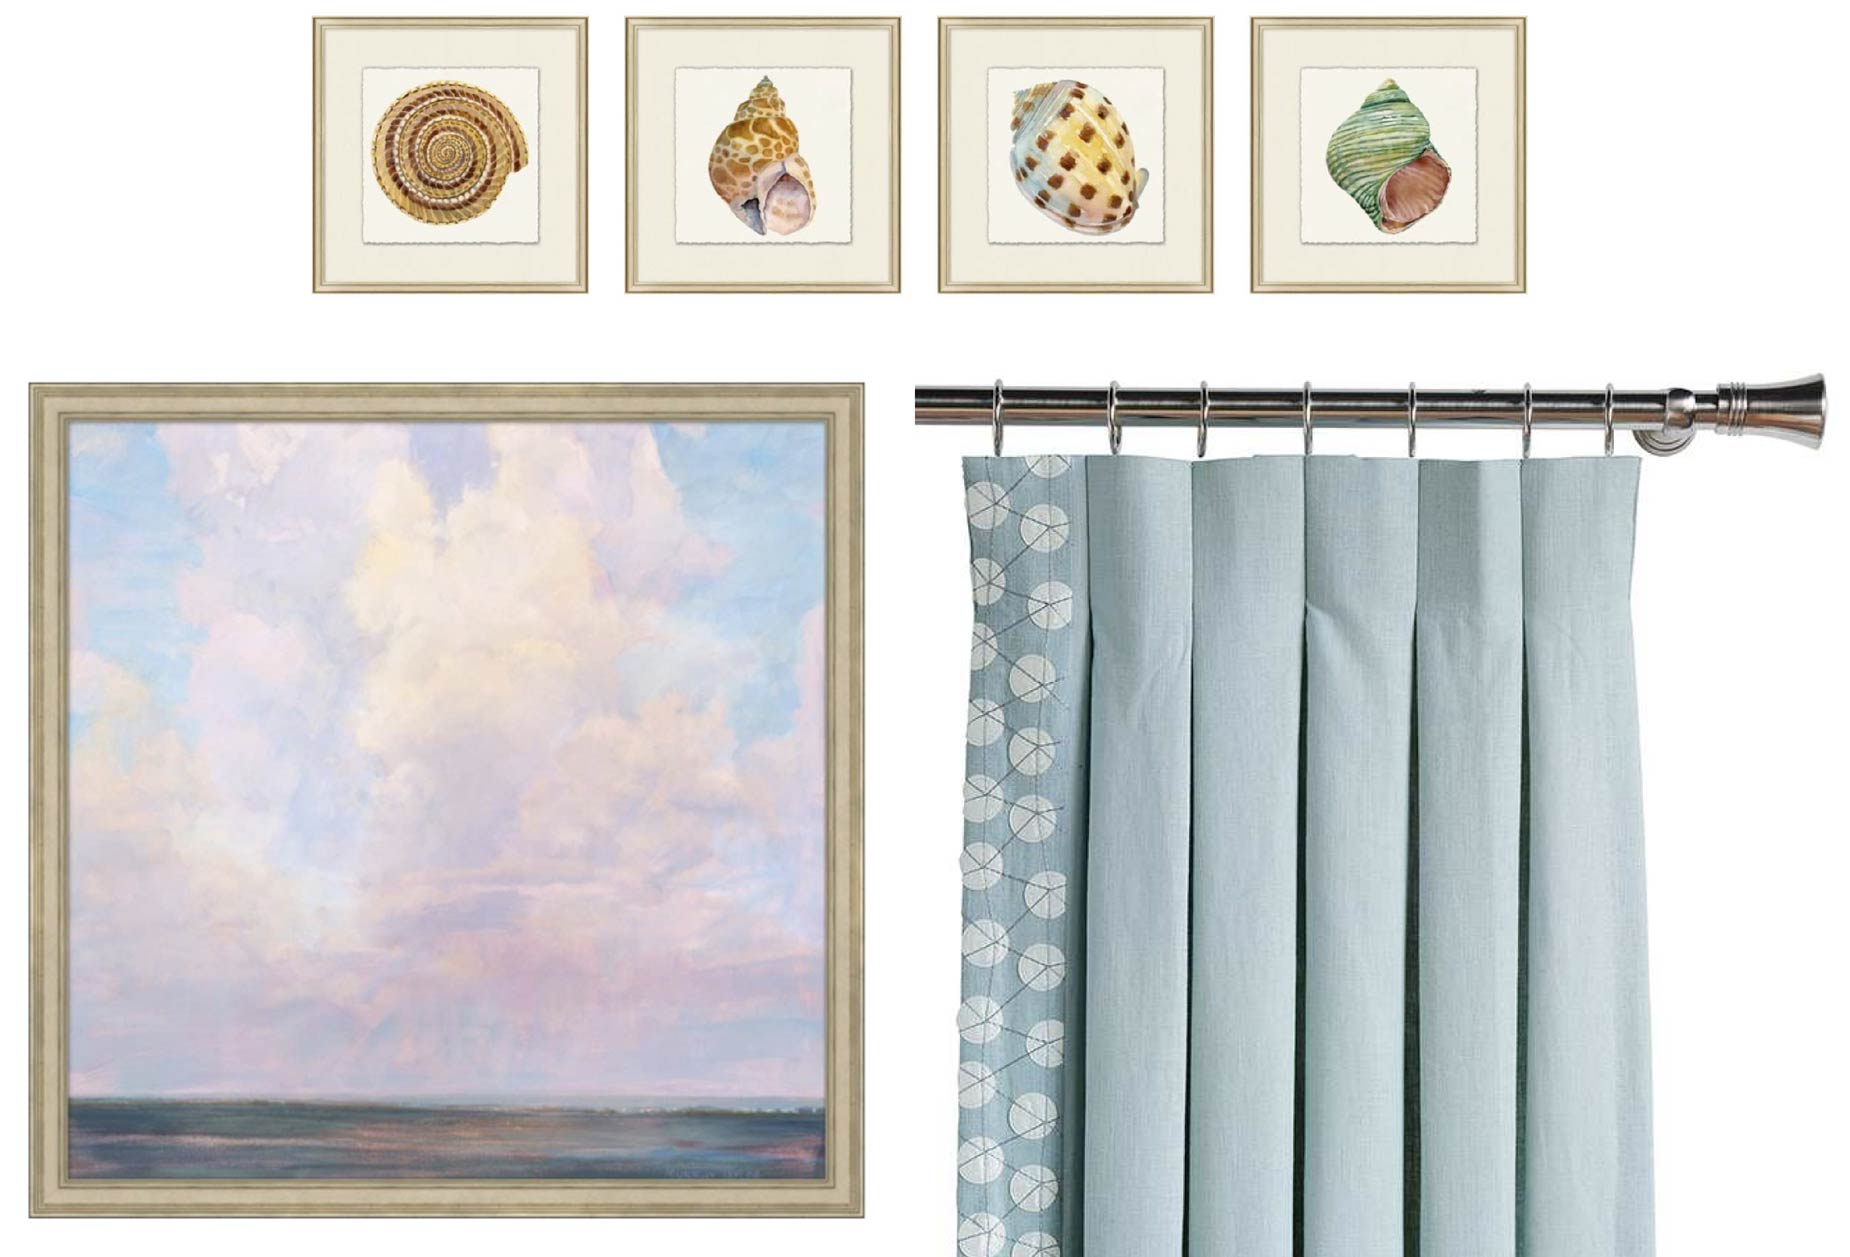 Mood Board Accessories include Framed prints of tropical scenery and curtains with tropical prints